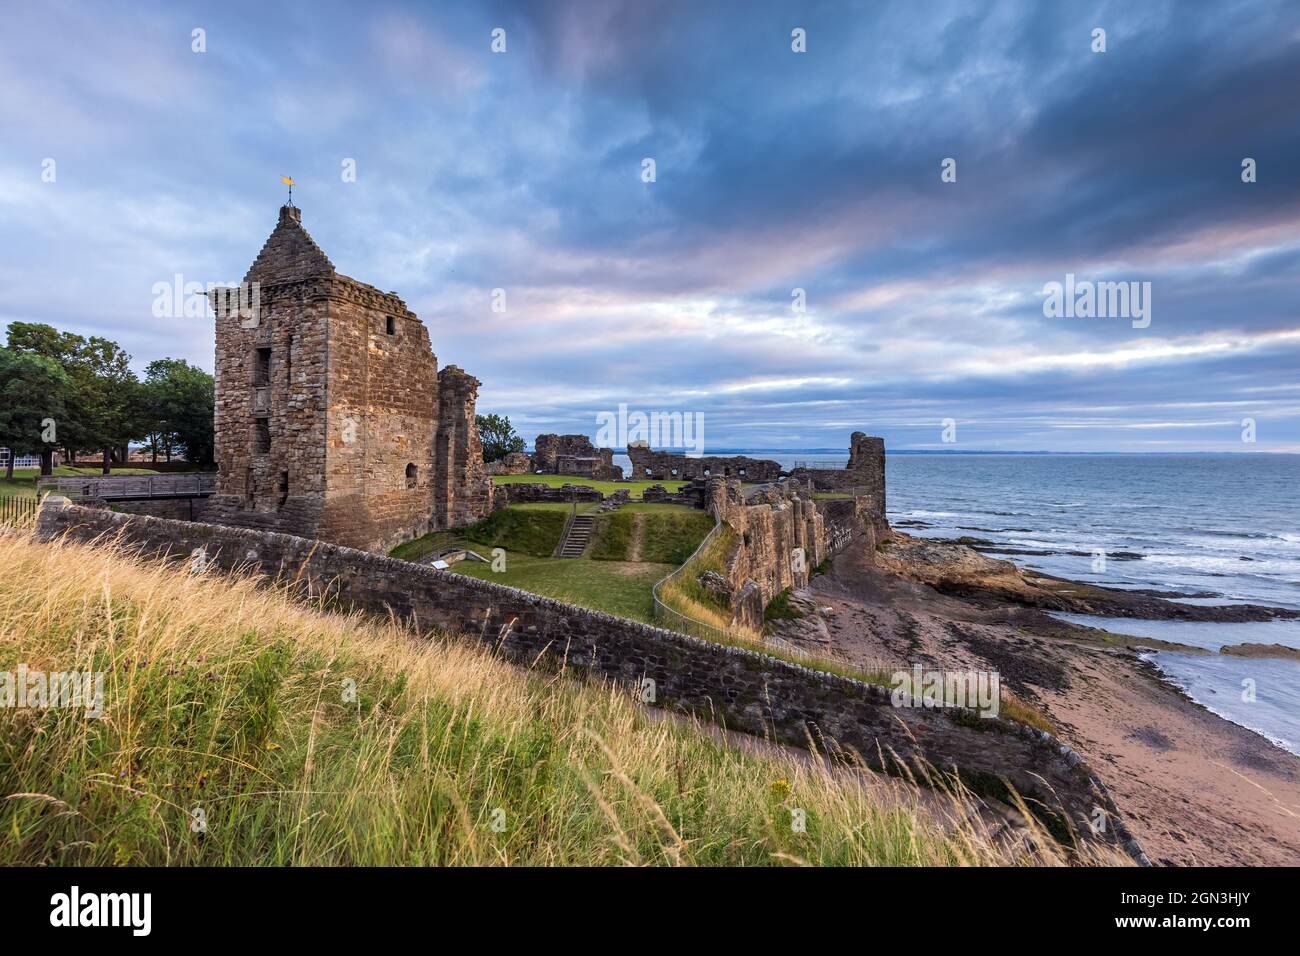 The historic remains of St Andrews Castle, a 13th century medieval fortress situated on a cliff top to the north of the town in Fife. Stock Photo